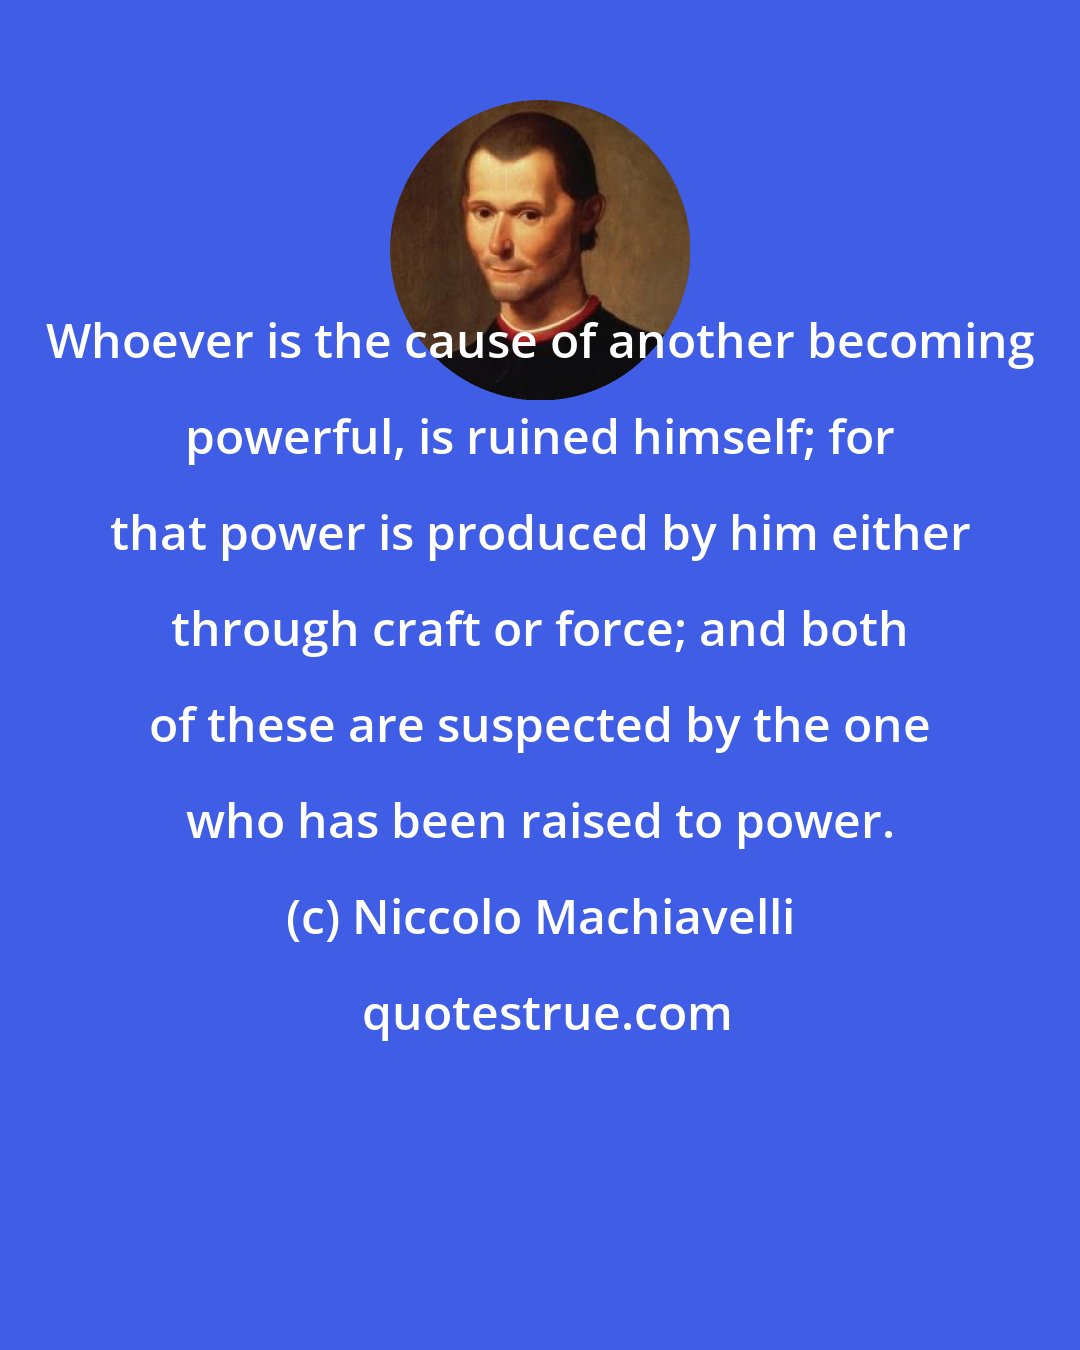 Niccolo Machiavelli: Whoever is the cause of another becoming powerful, is ruined himself; for that power is produced by him either through craft or force; and both of these are suspected by the one who has been raised to power.